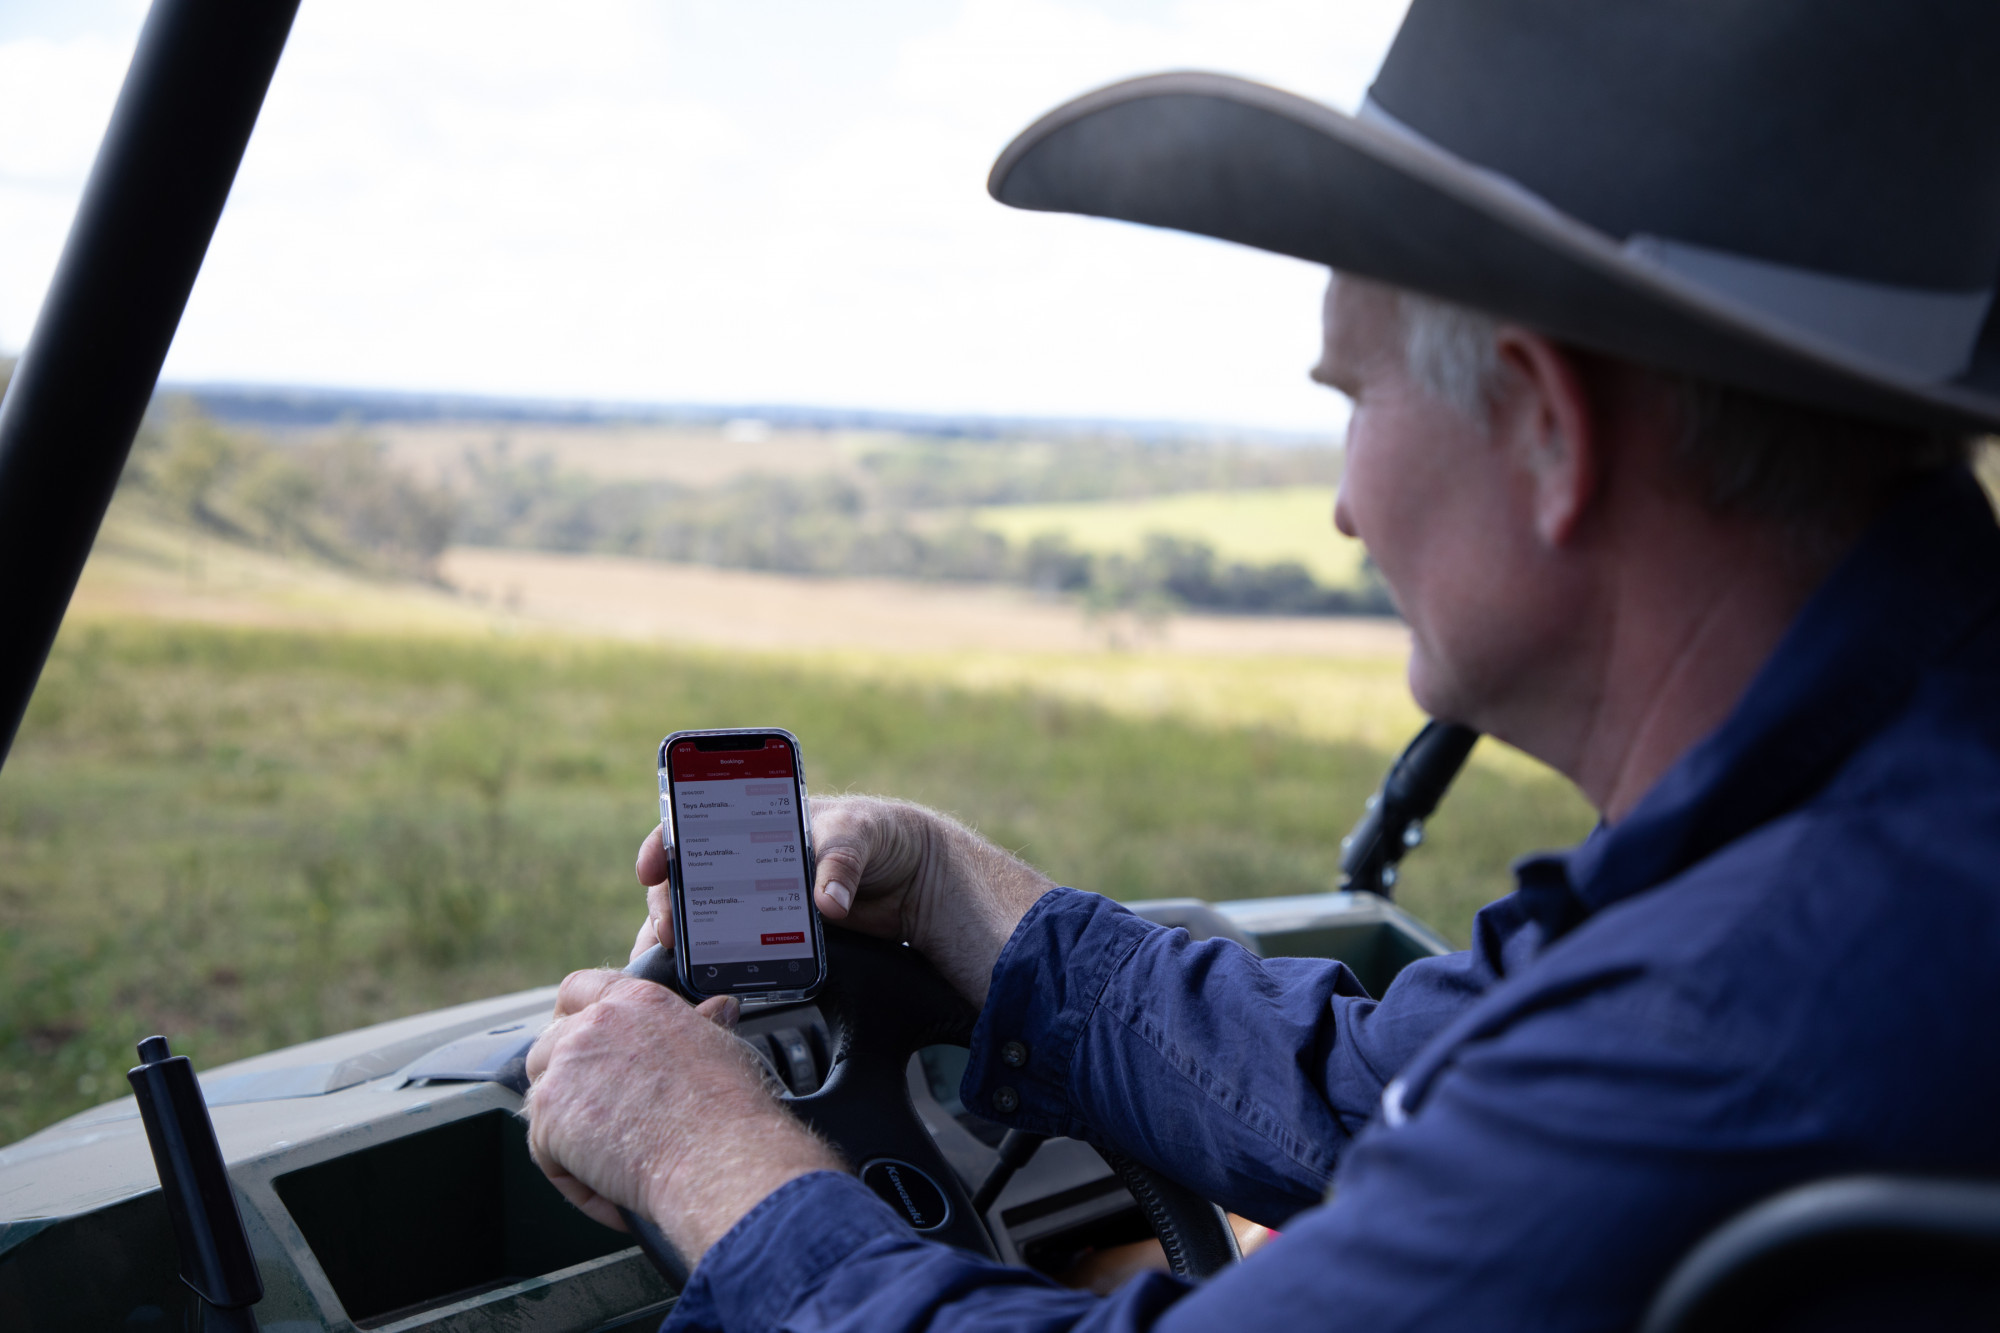 Coles and beef producers get appy to make life easier on the farm - feature photo